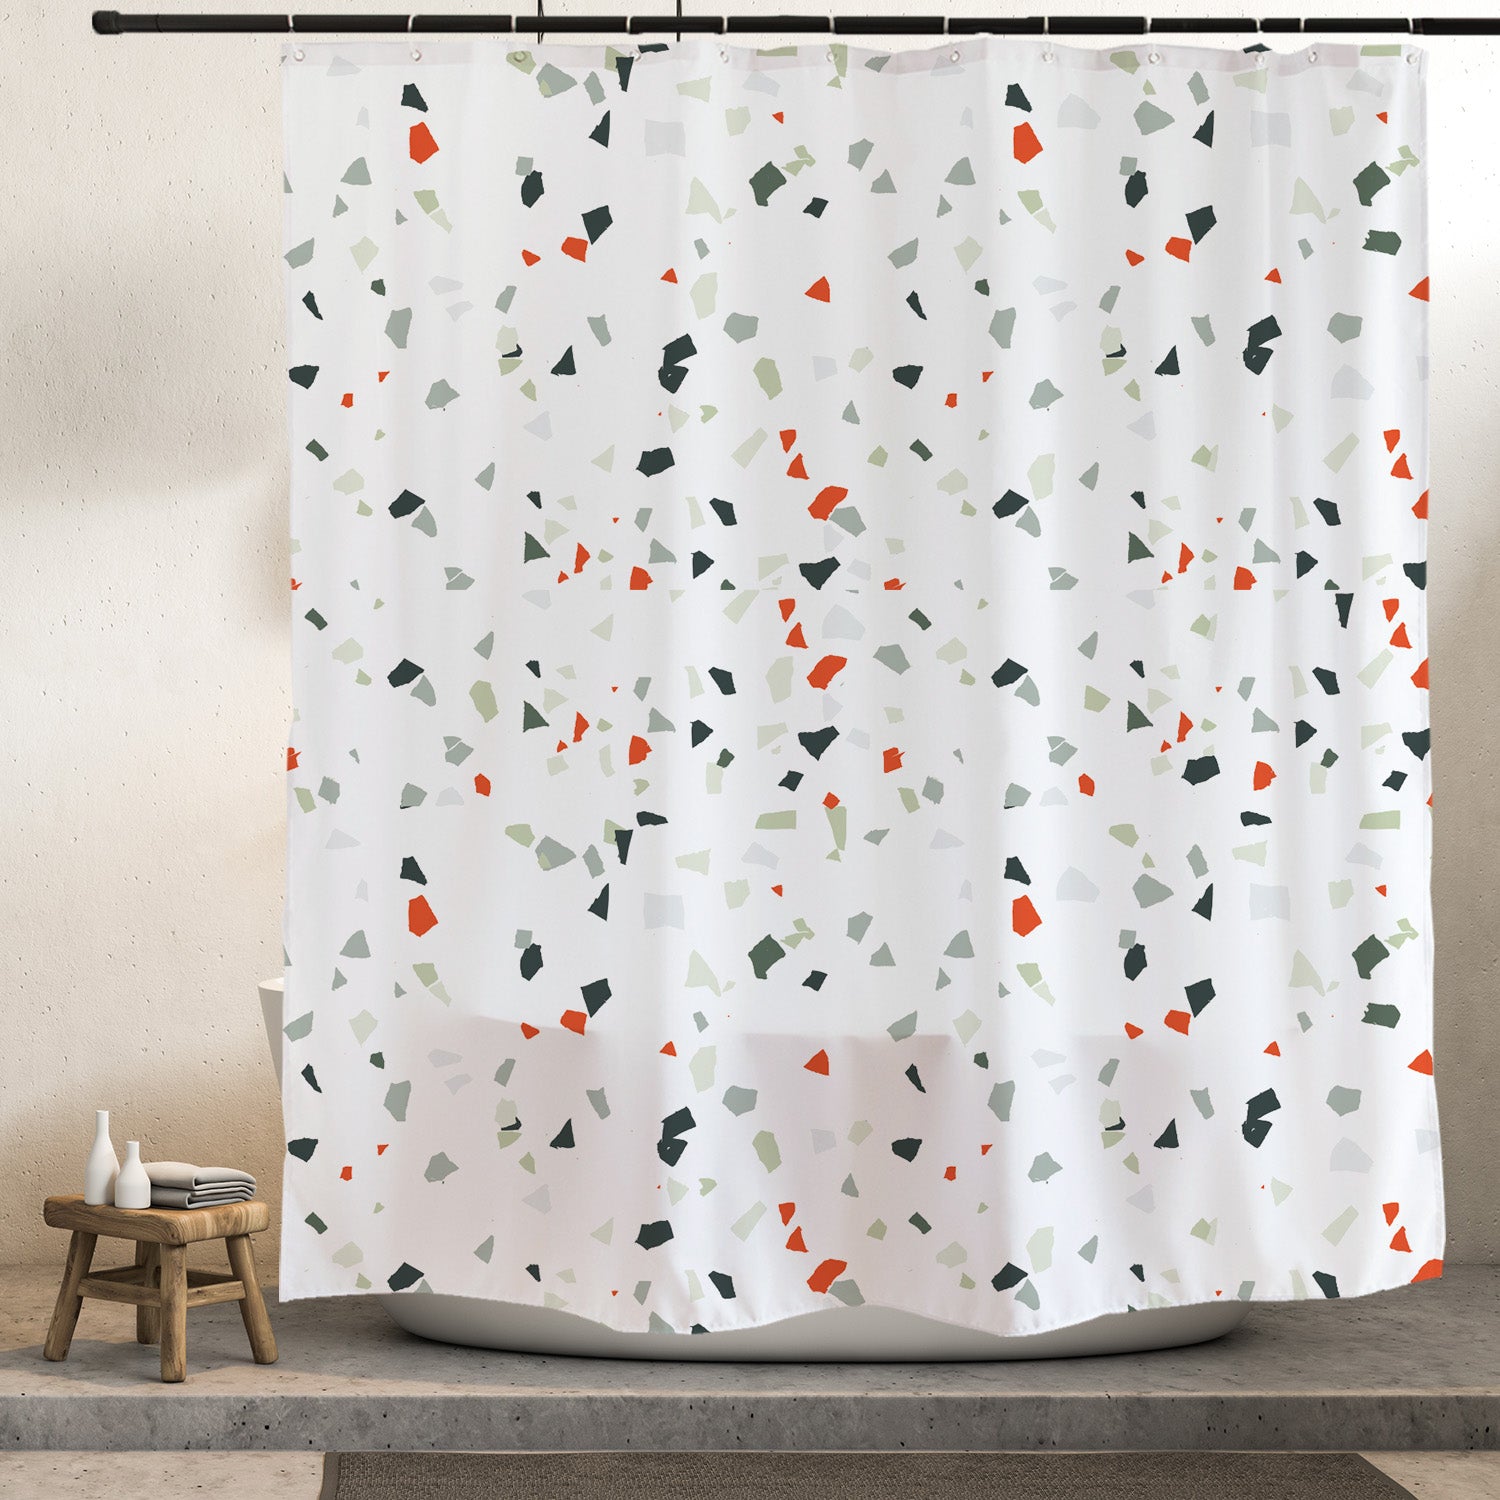 Feblilac Terrazzo Pattern Road Shower Curtain with Hooks